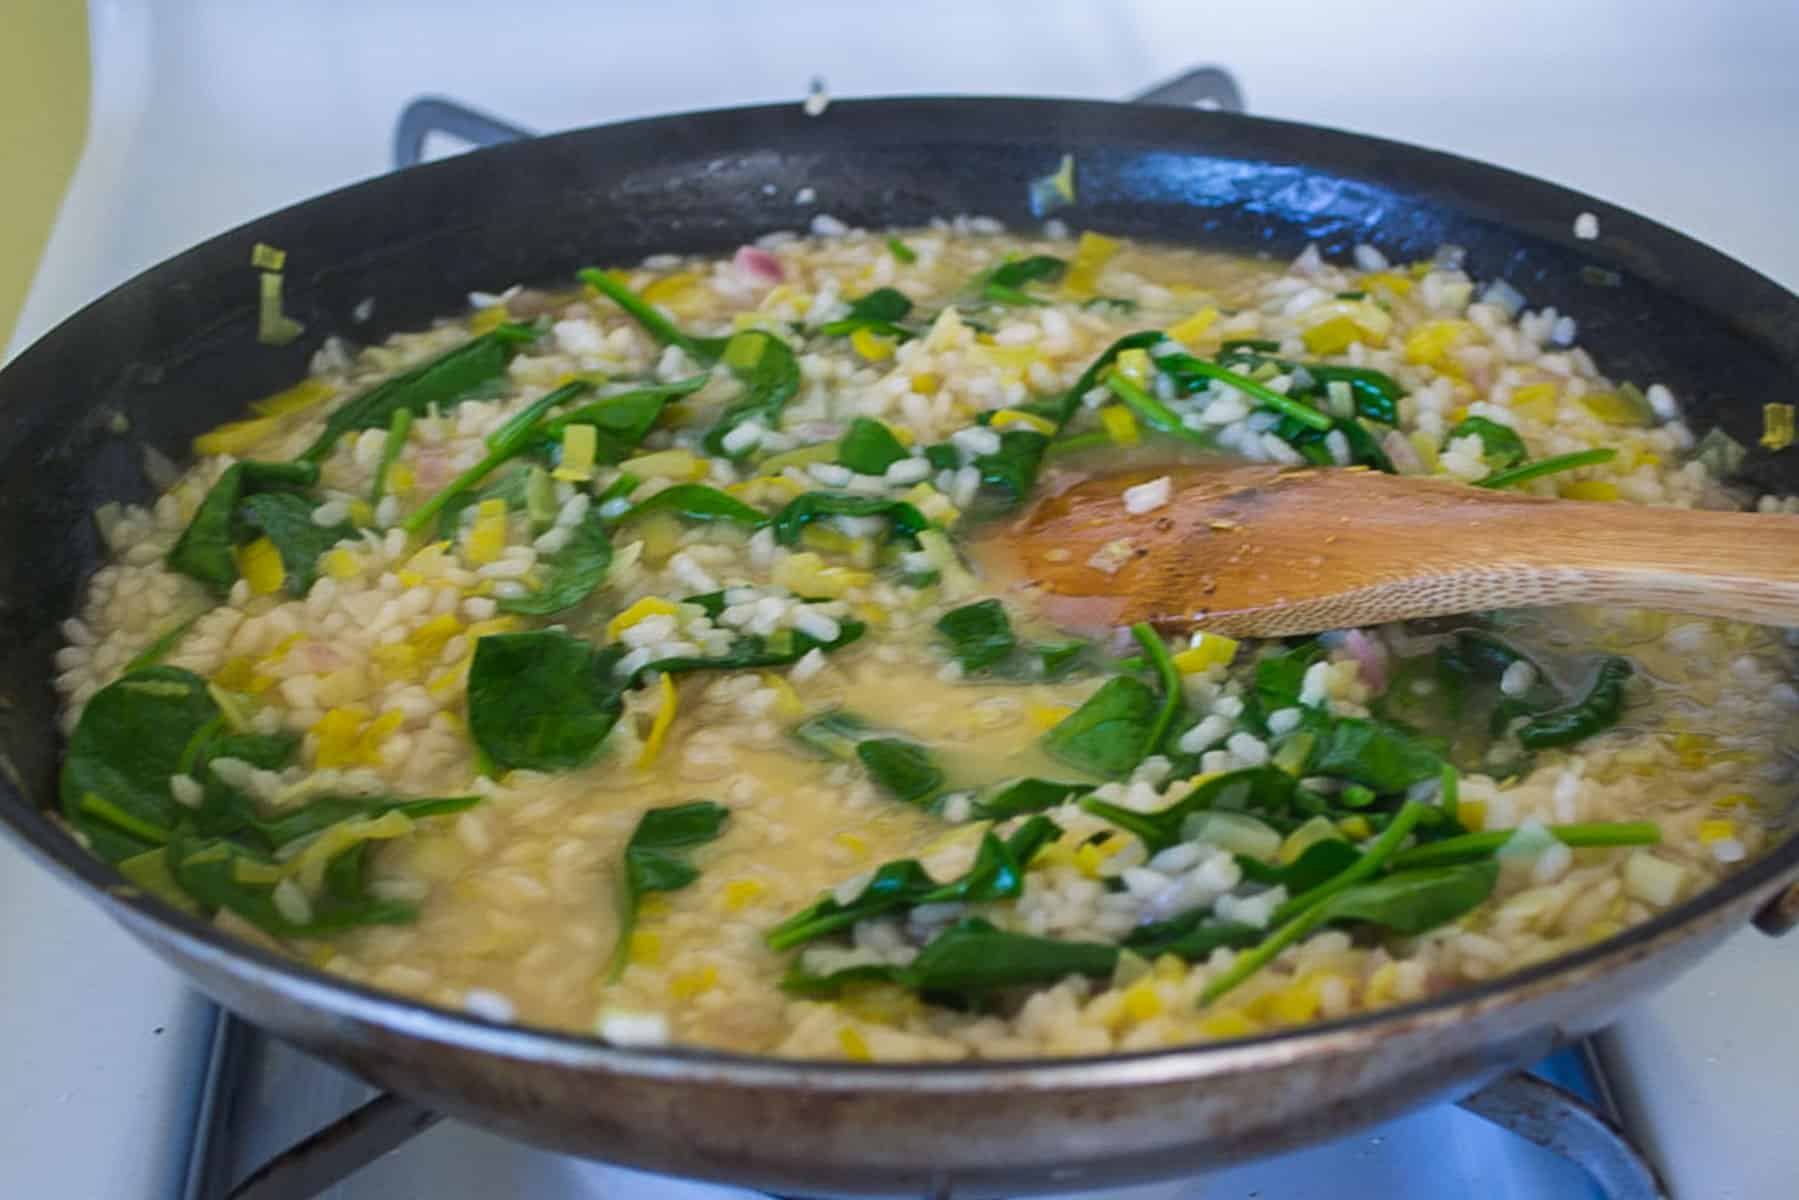 Add fresh baby spinach to the risotto and stir until just wilted.